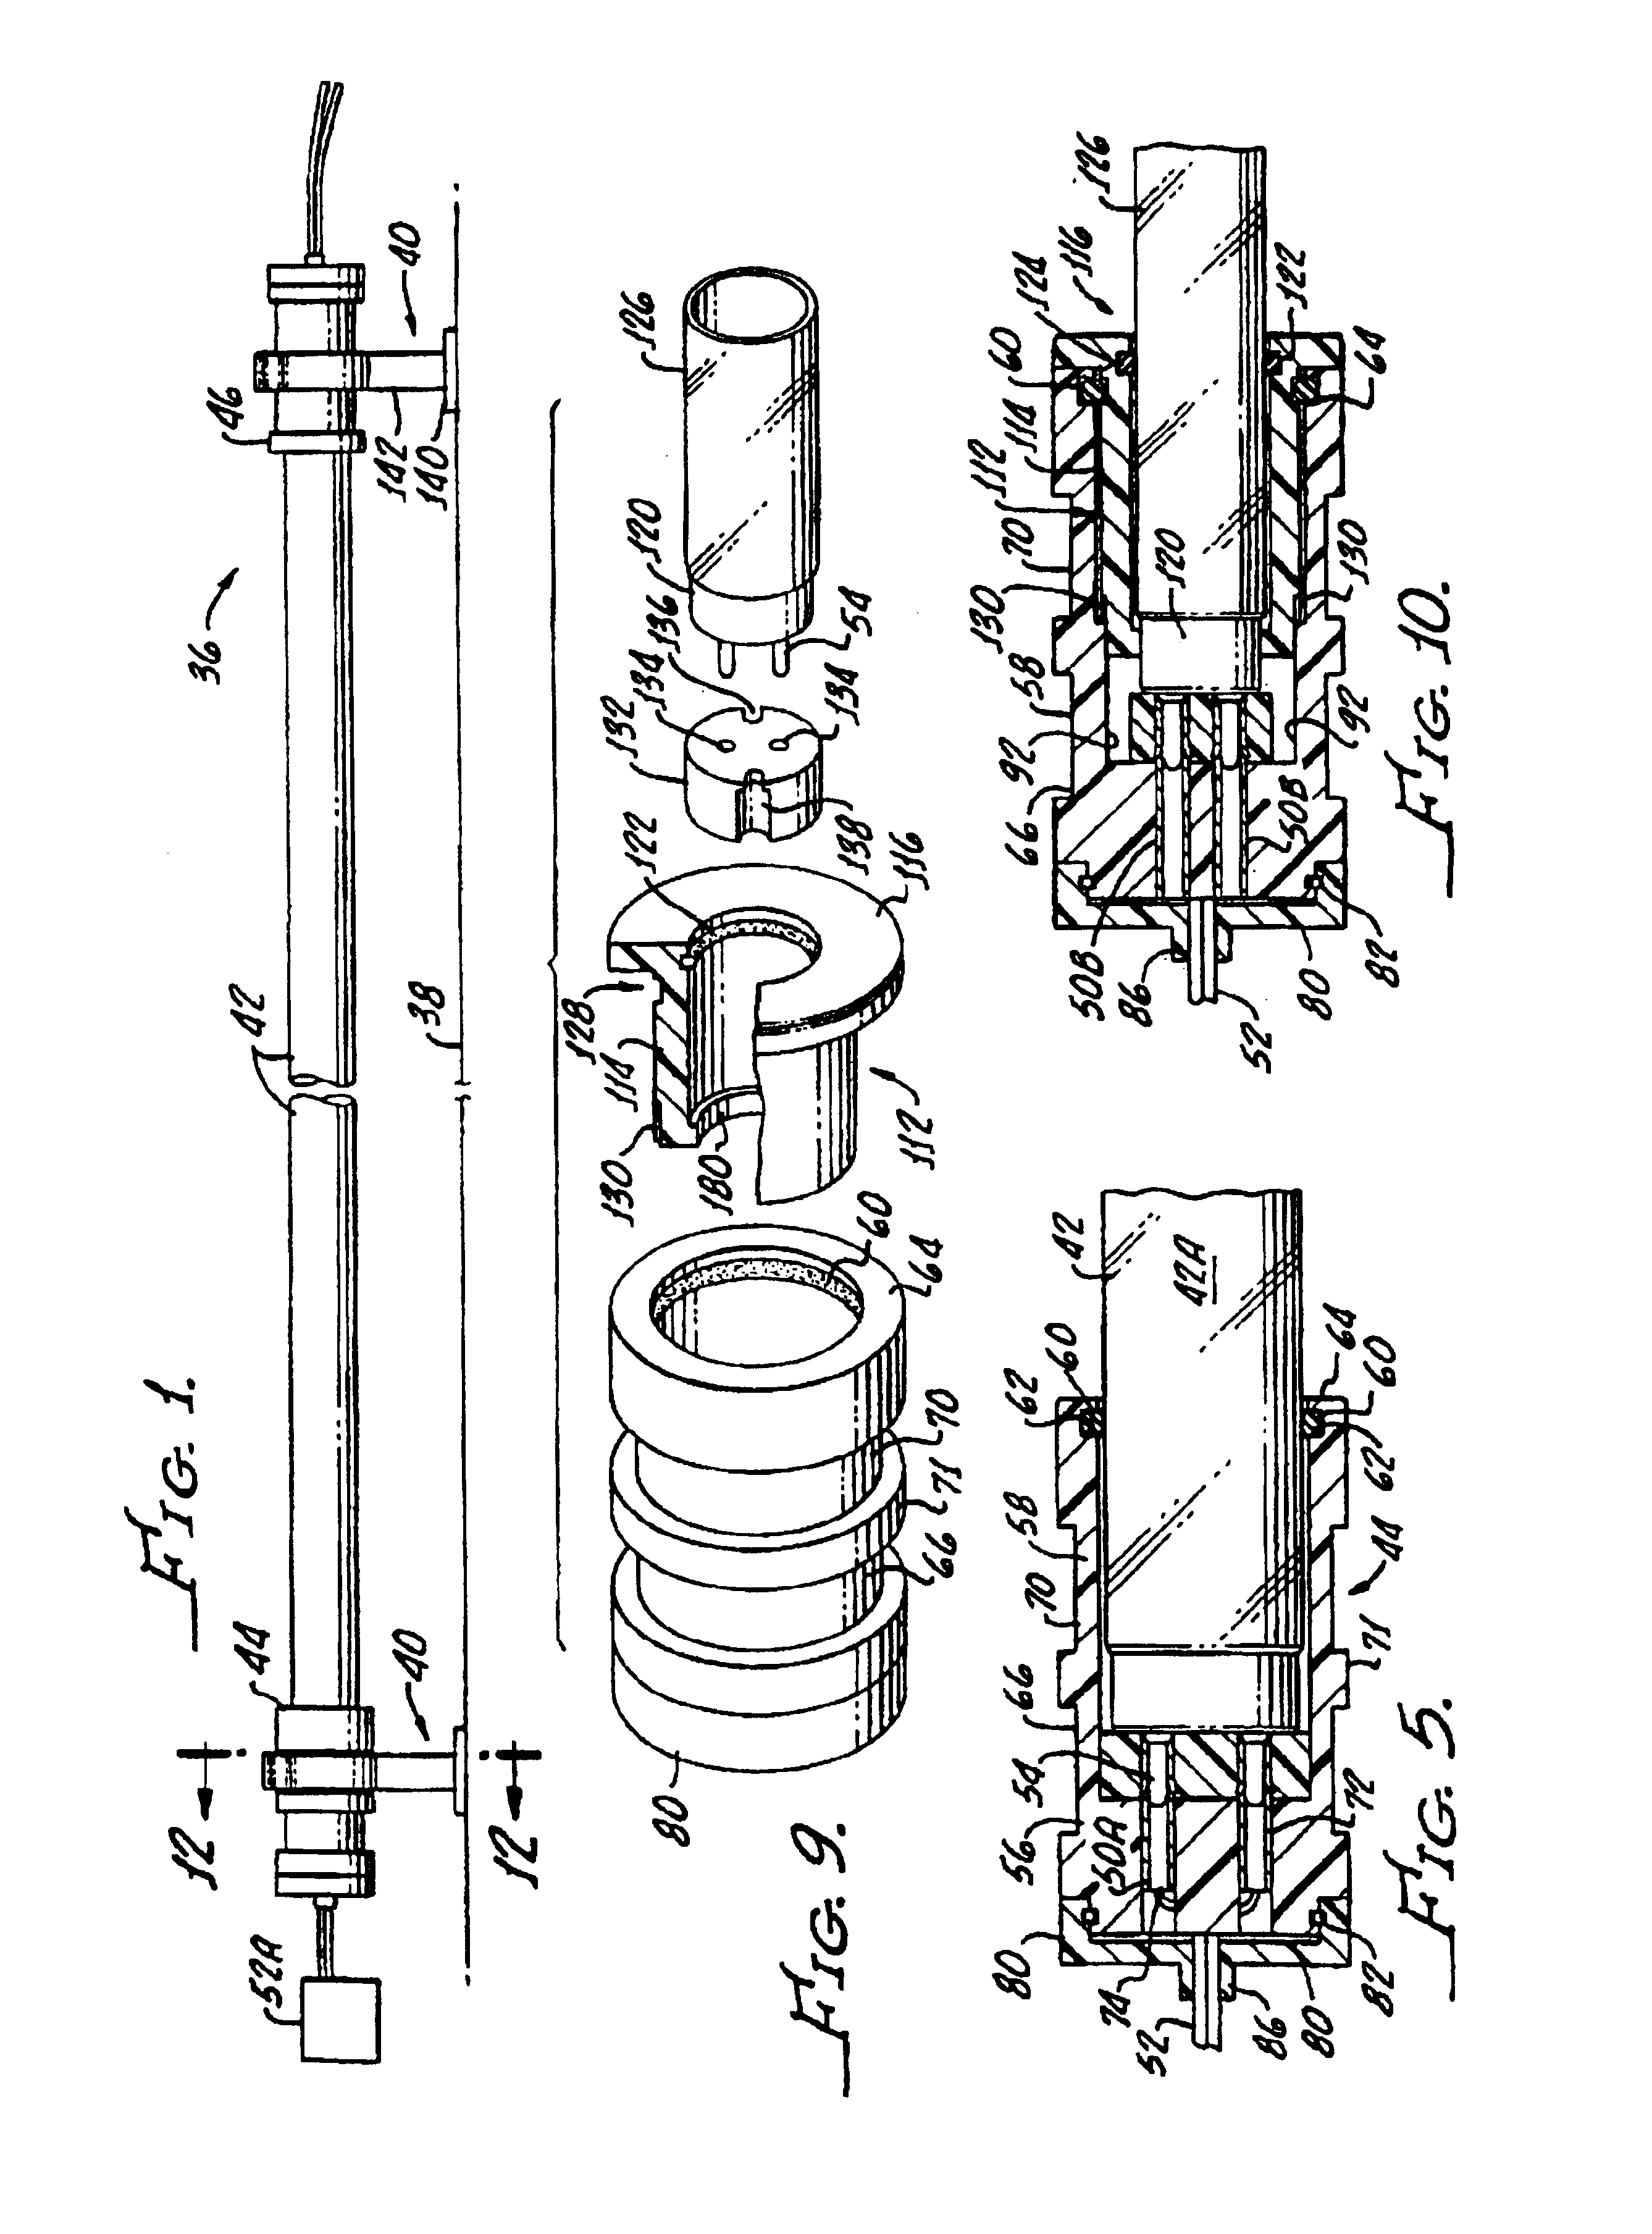 Lighting circuit, lighting system method and apparatus, socket assembly, lamp insulator assembly and components thereof